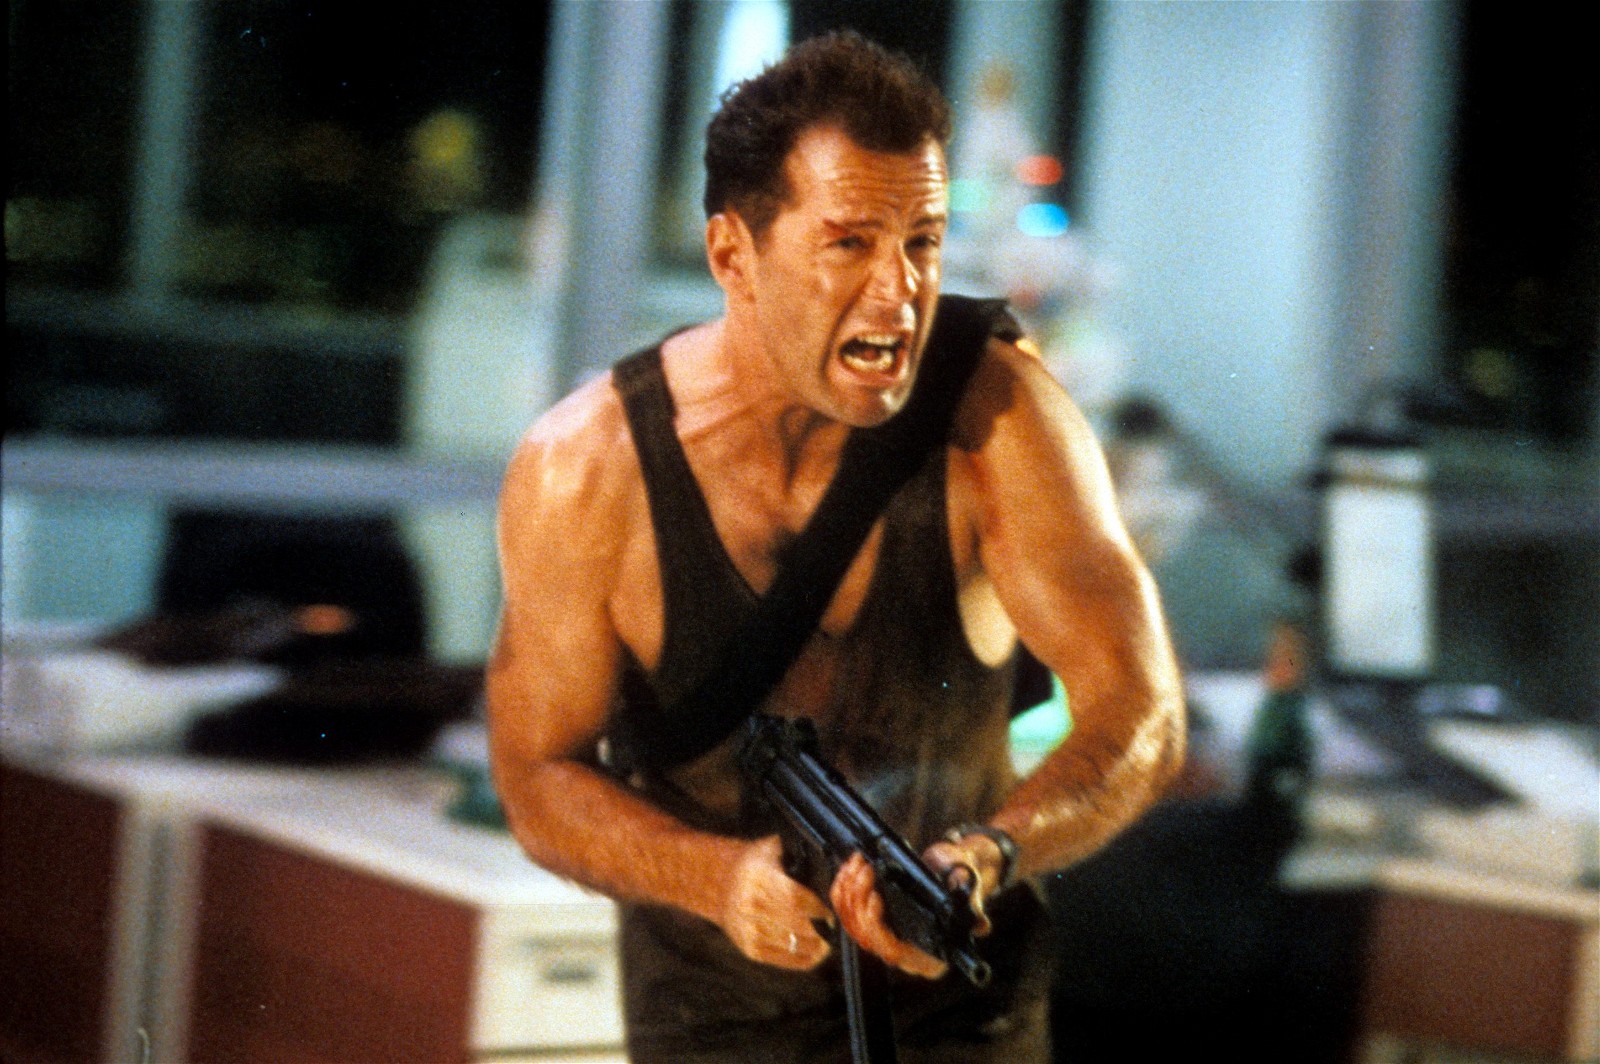 A certain experience from Bruce Willis' Die hard inspiredthe opening scee in 1994's Speed |20th Century Fox